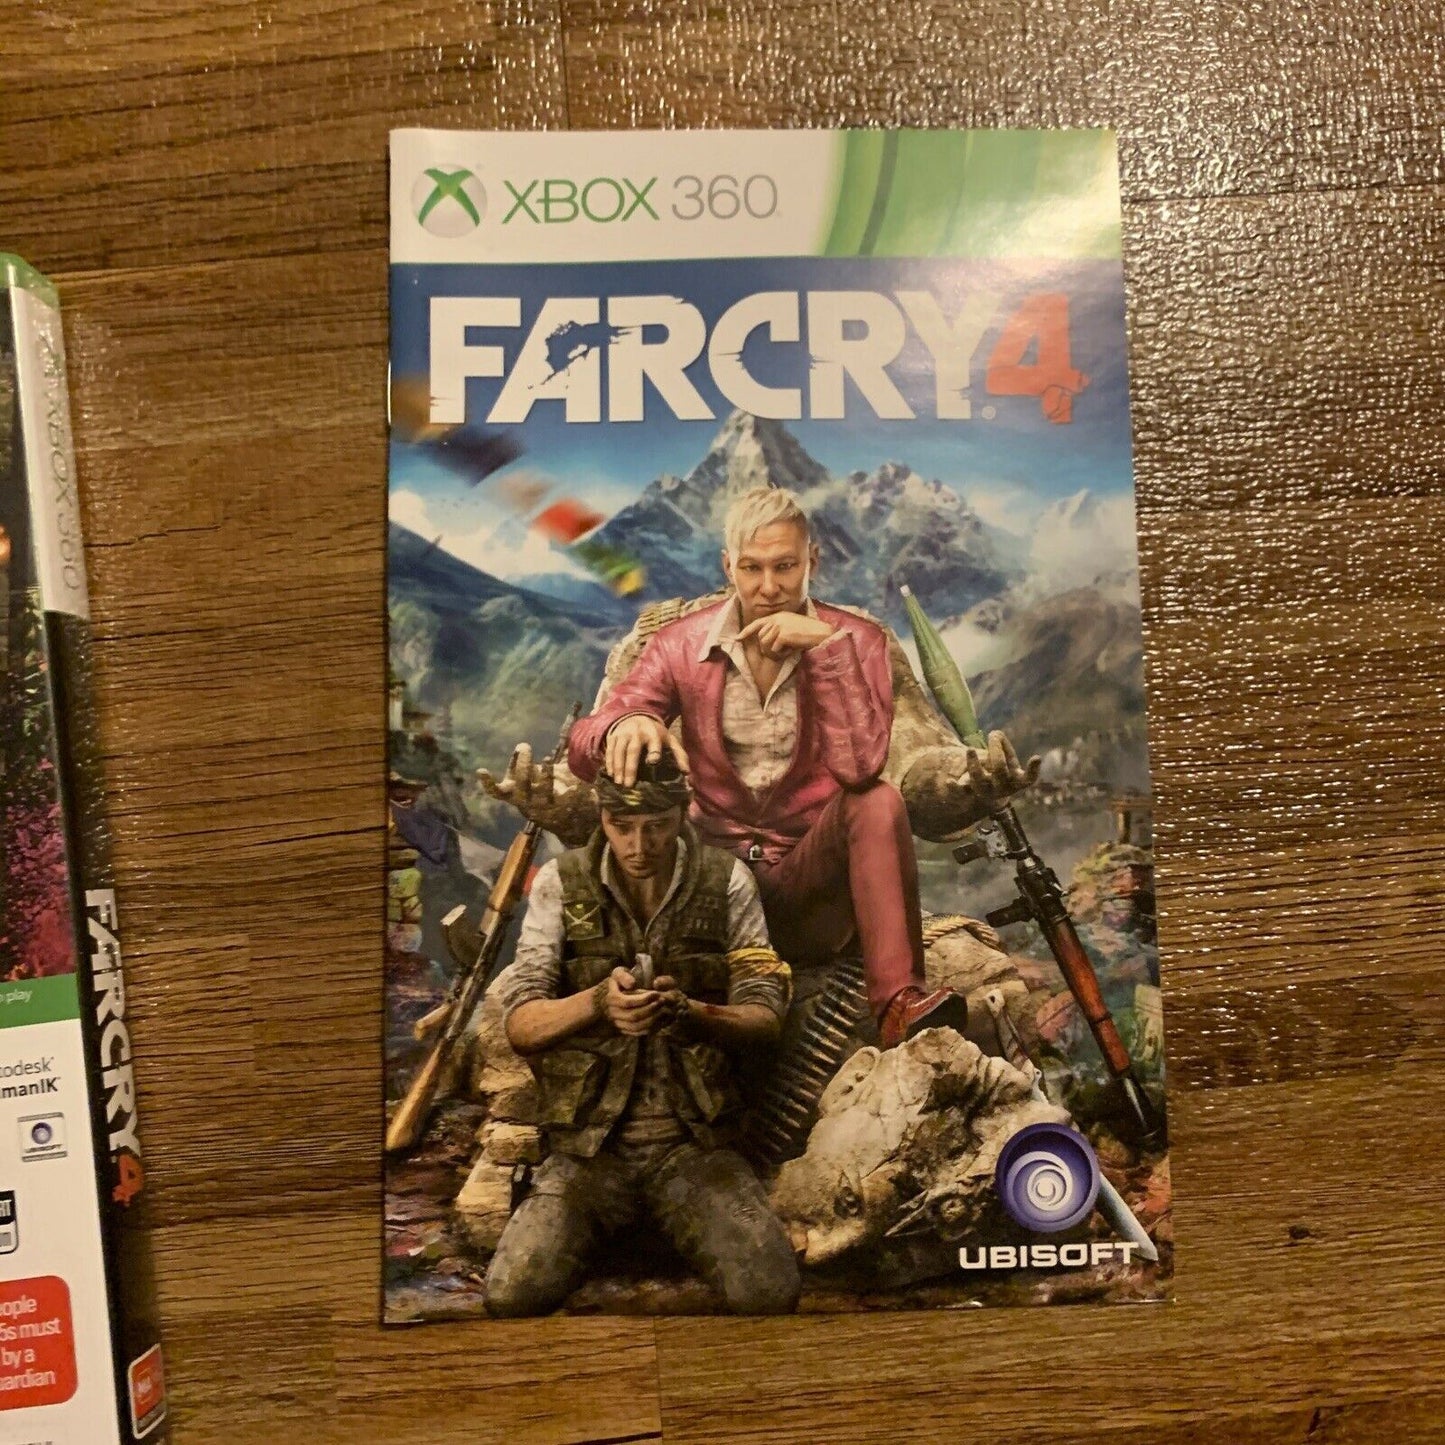 Far Cry 4 - Limited Edition XBOX 360 Includes Manual PAL